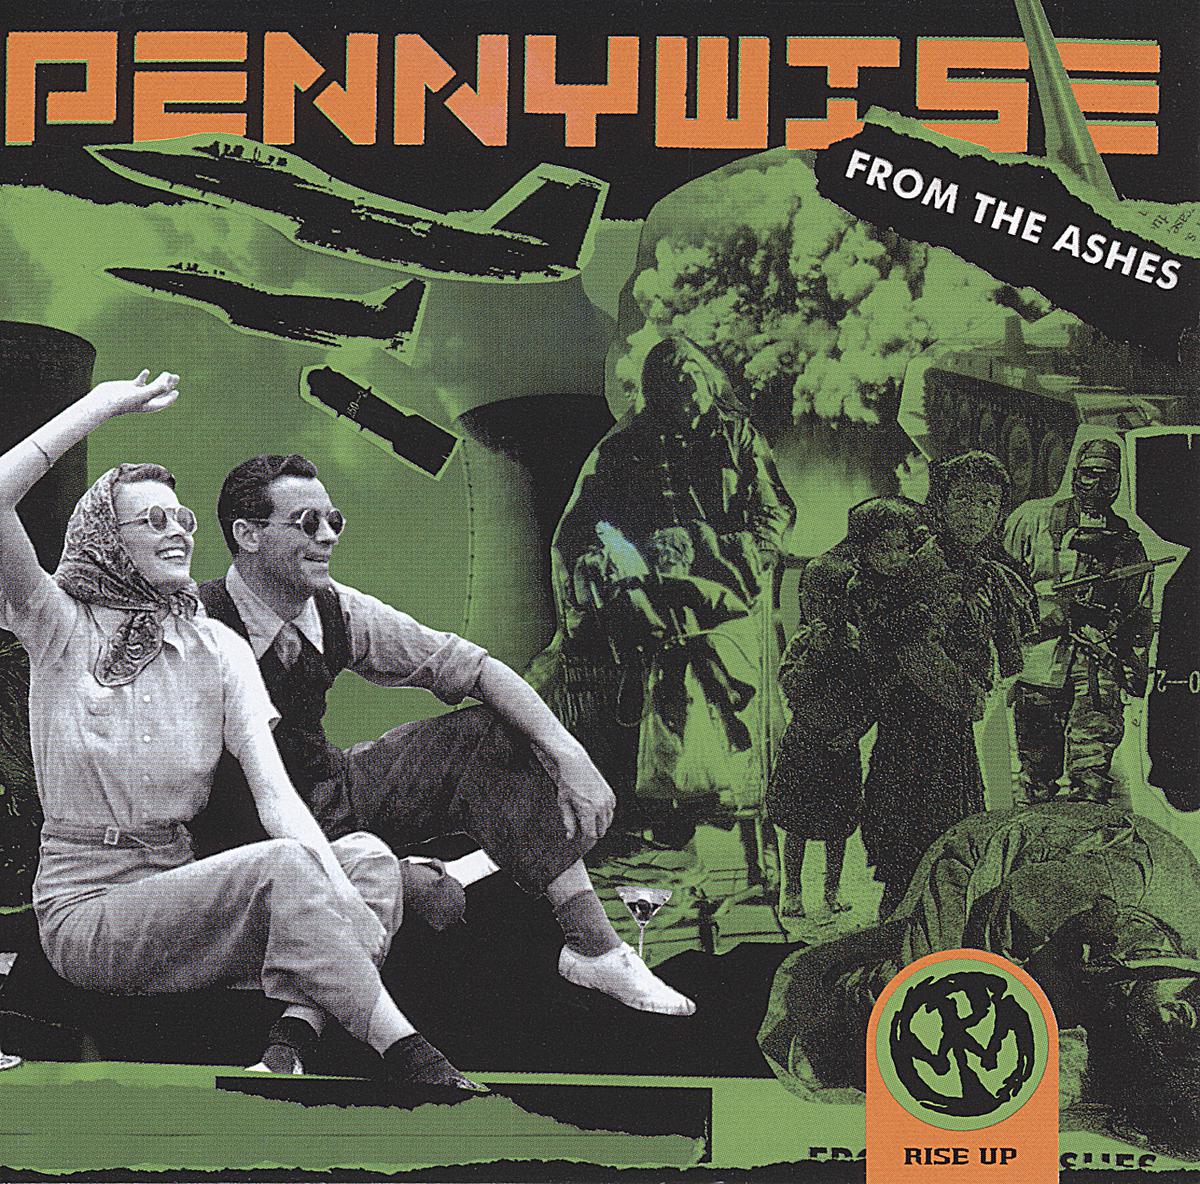 Pennywise - From The Ashes (Vinyl, LP)